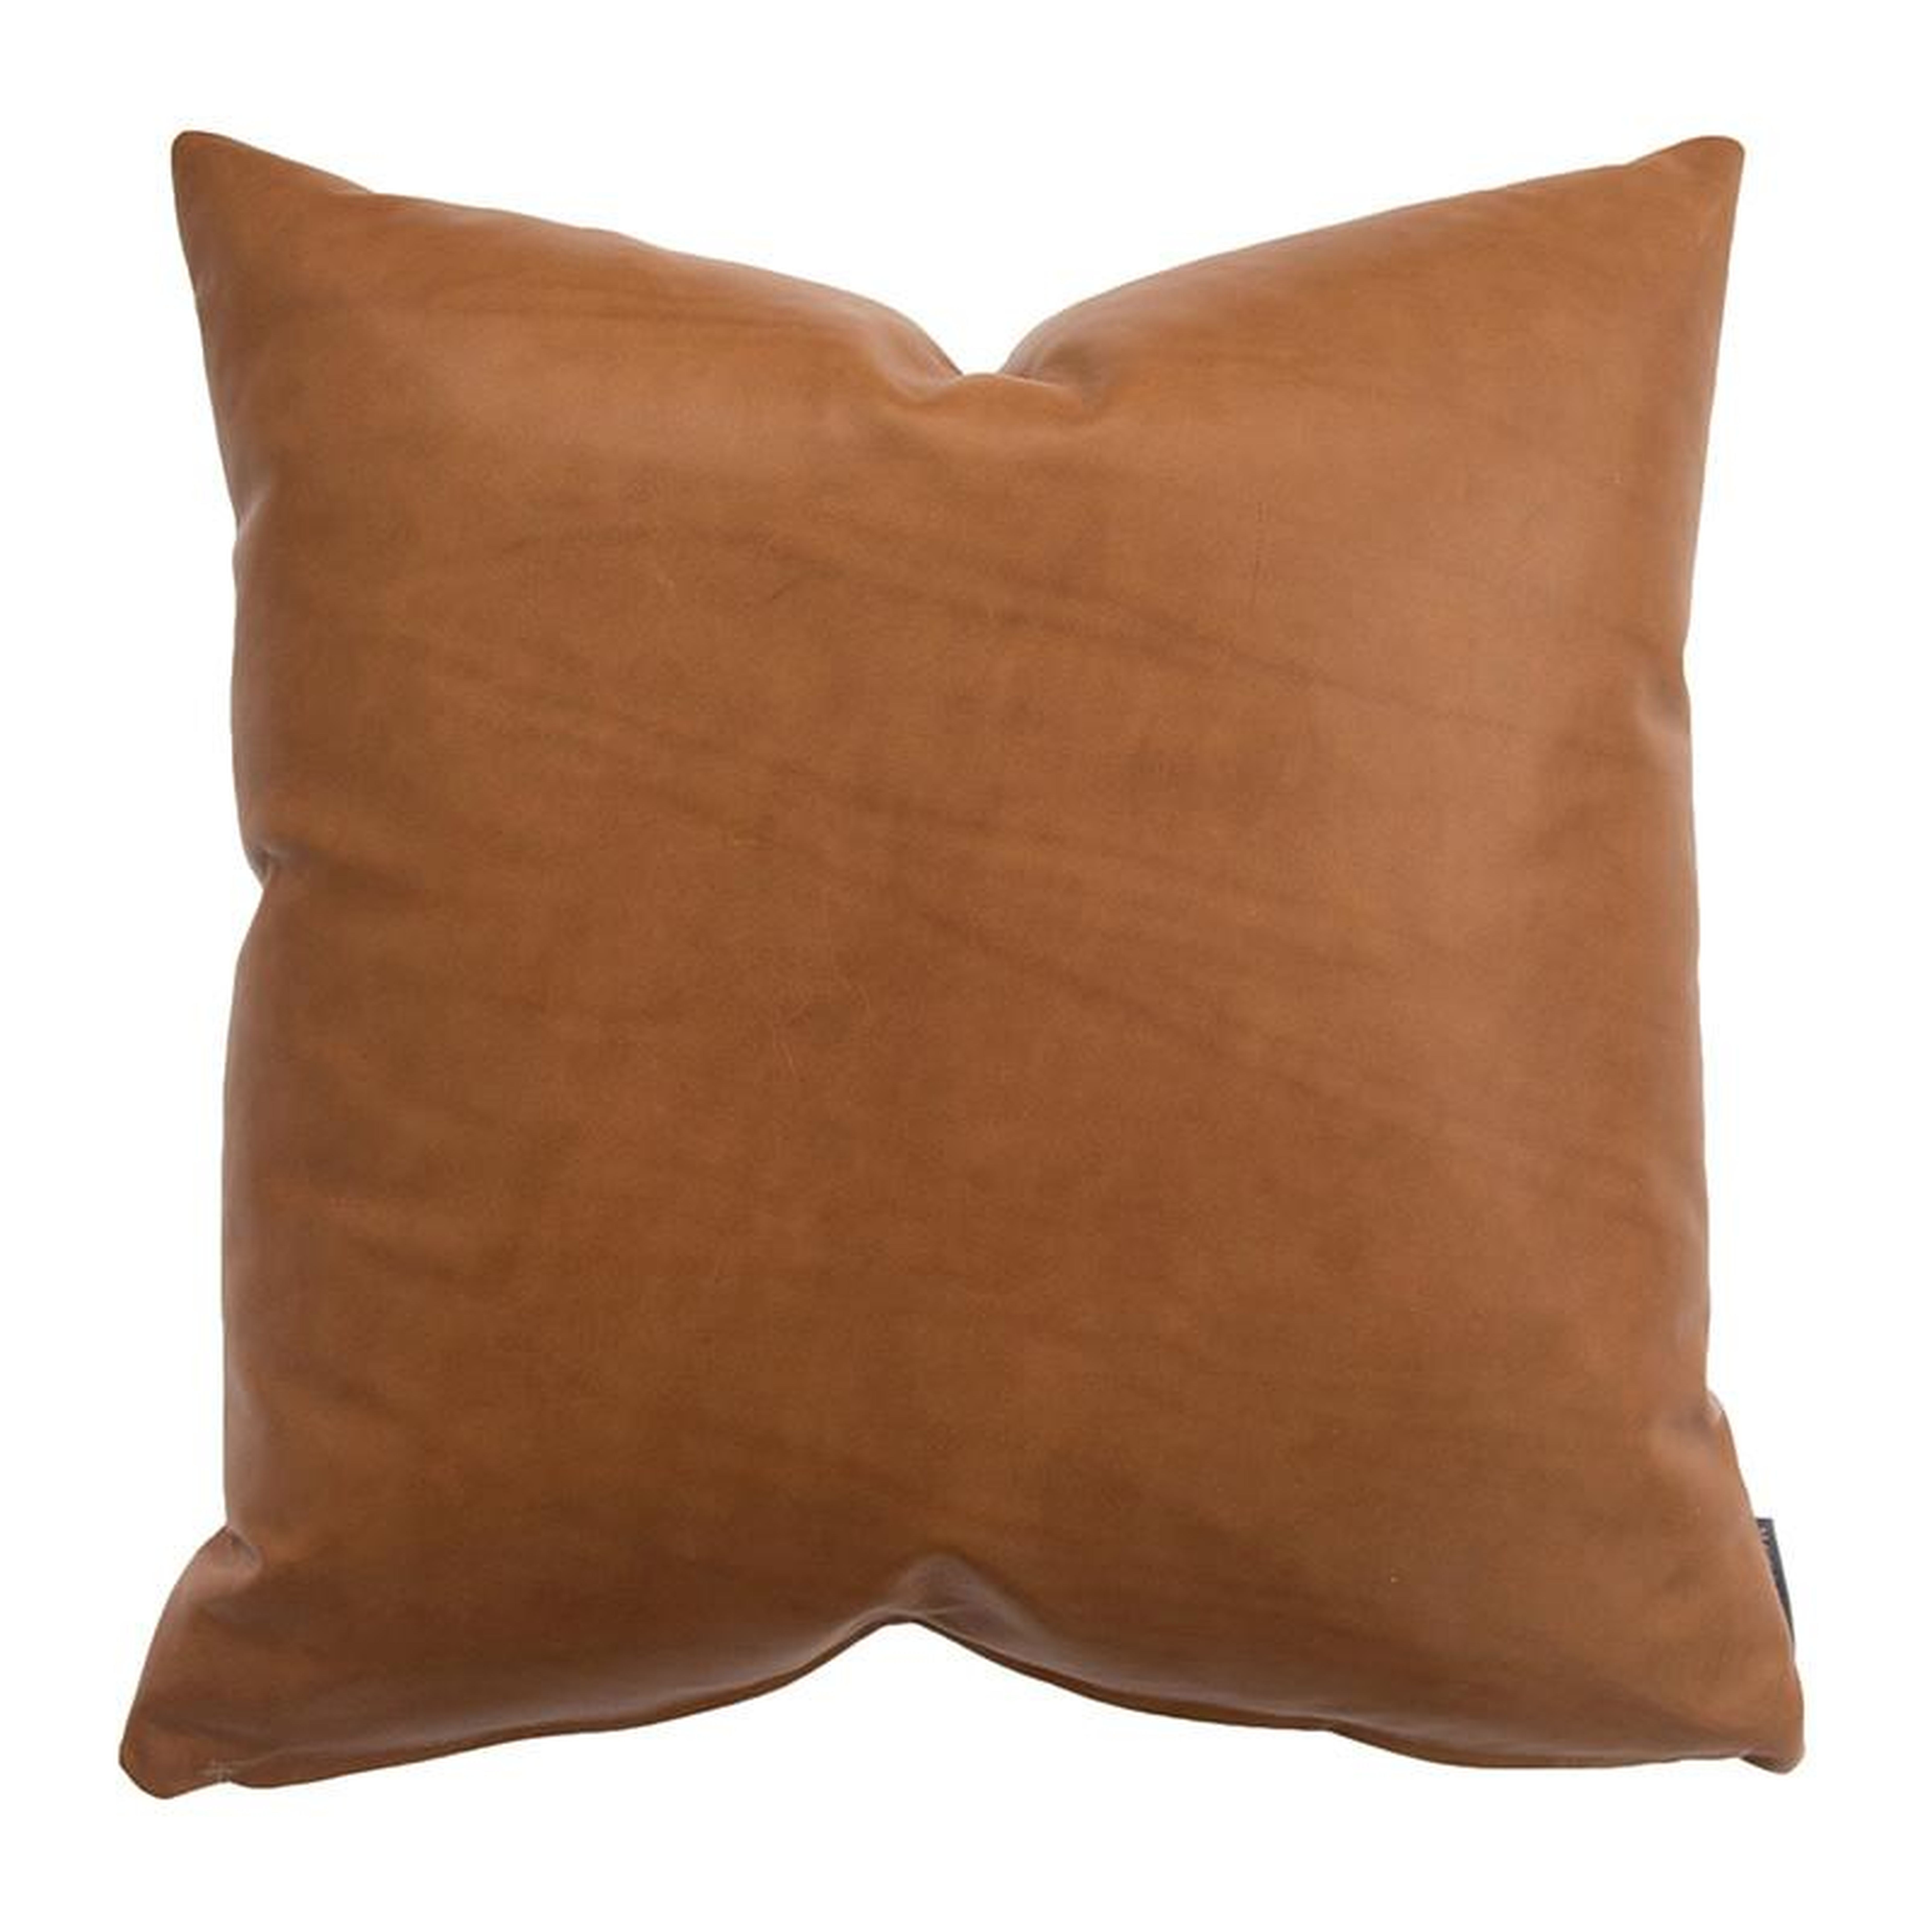 COGNAC LEATHER PILLOW COVER WITH DOWN INSERT, 20" x 20" - McGee & Co.